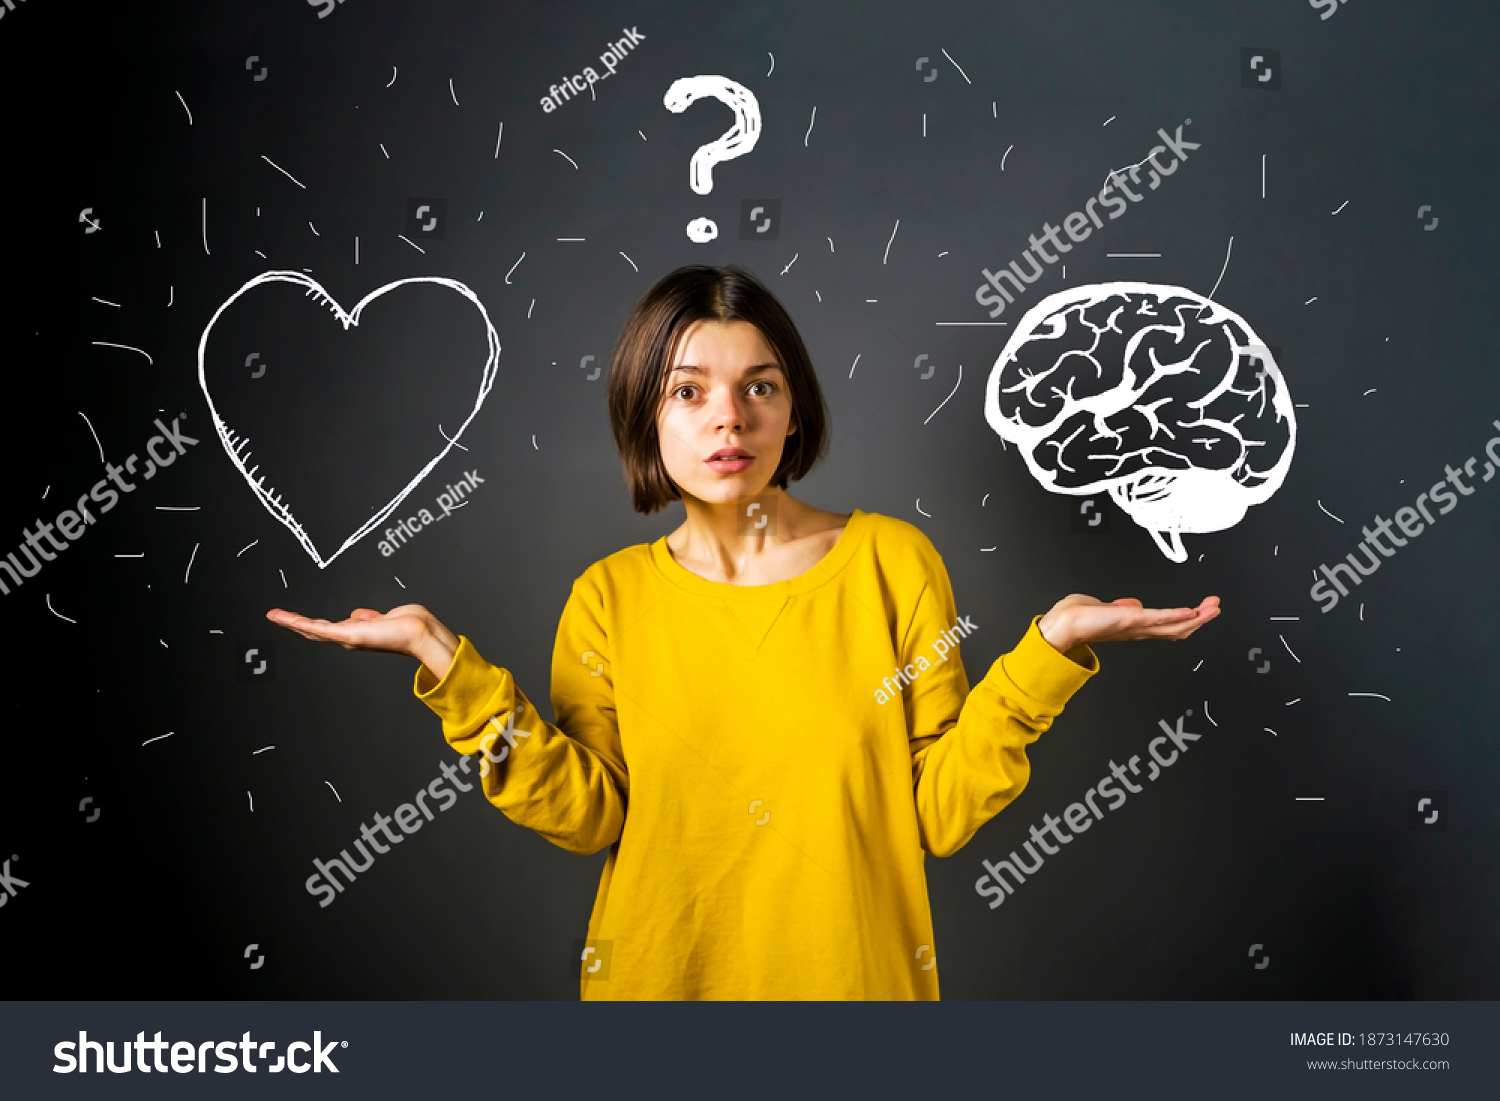 Brain or heart? A young girl is puzzled by the choice between a rational logical decision and an irrational emotional one. #1873147630